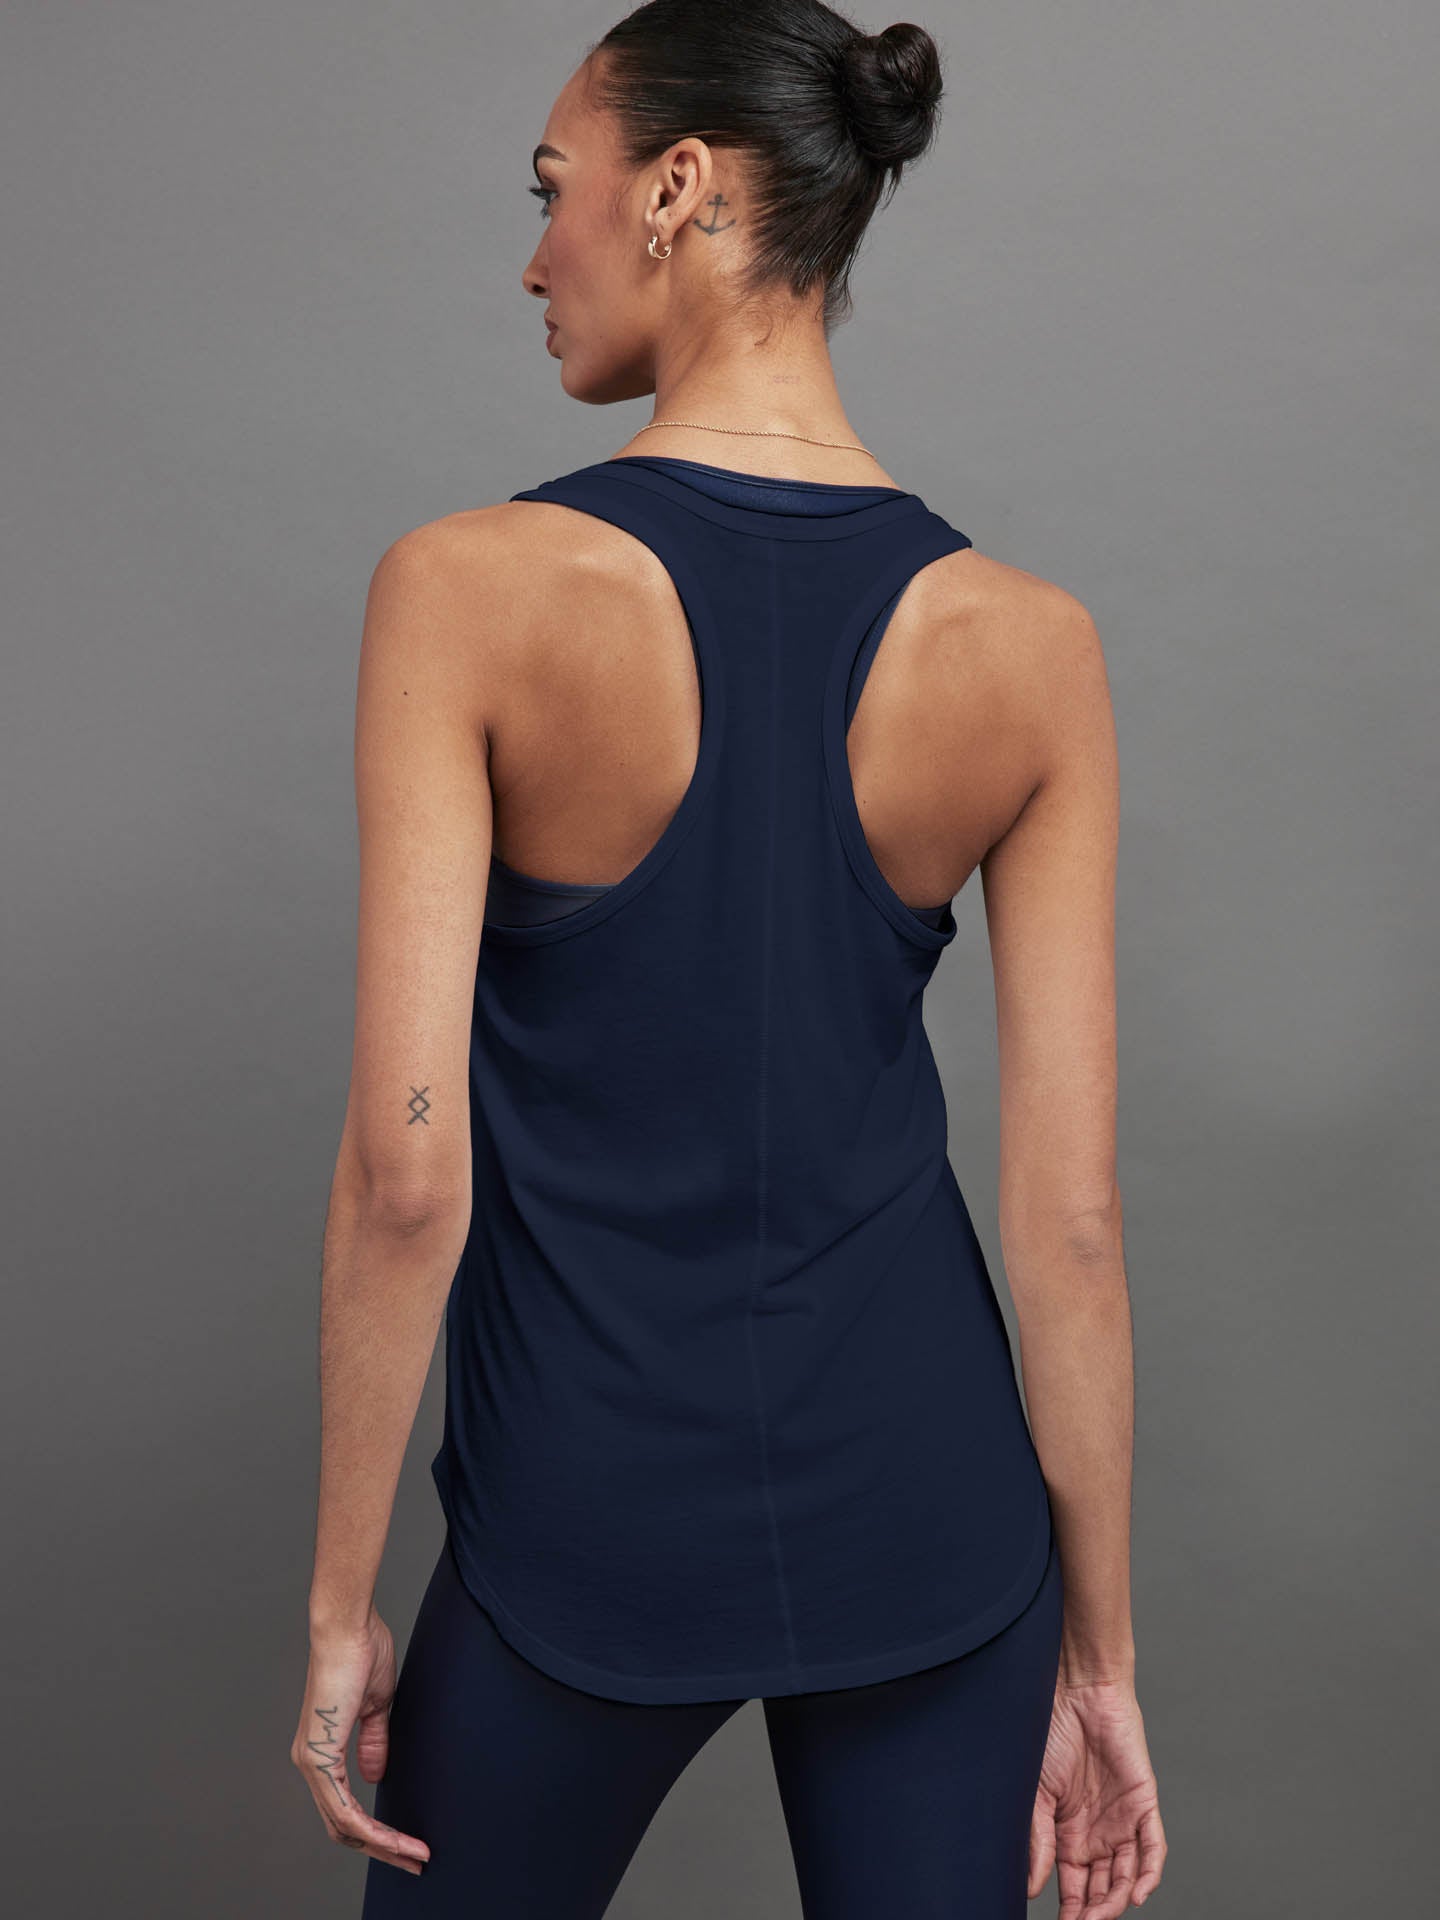 Carbon 38 Women's Blue Athletic Cropped Racer BAck Tank Top